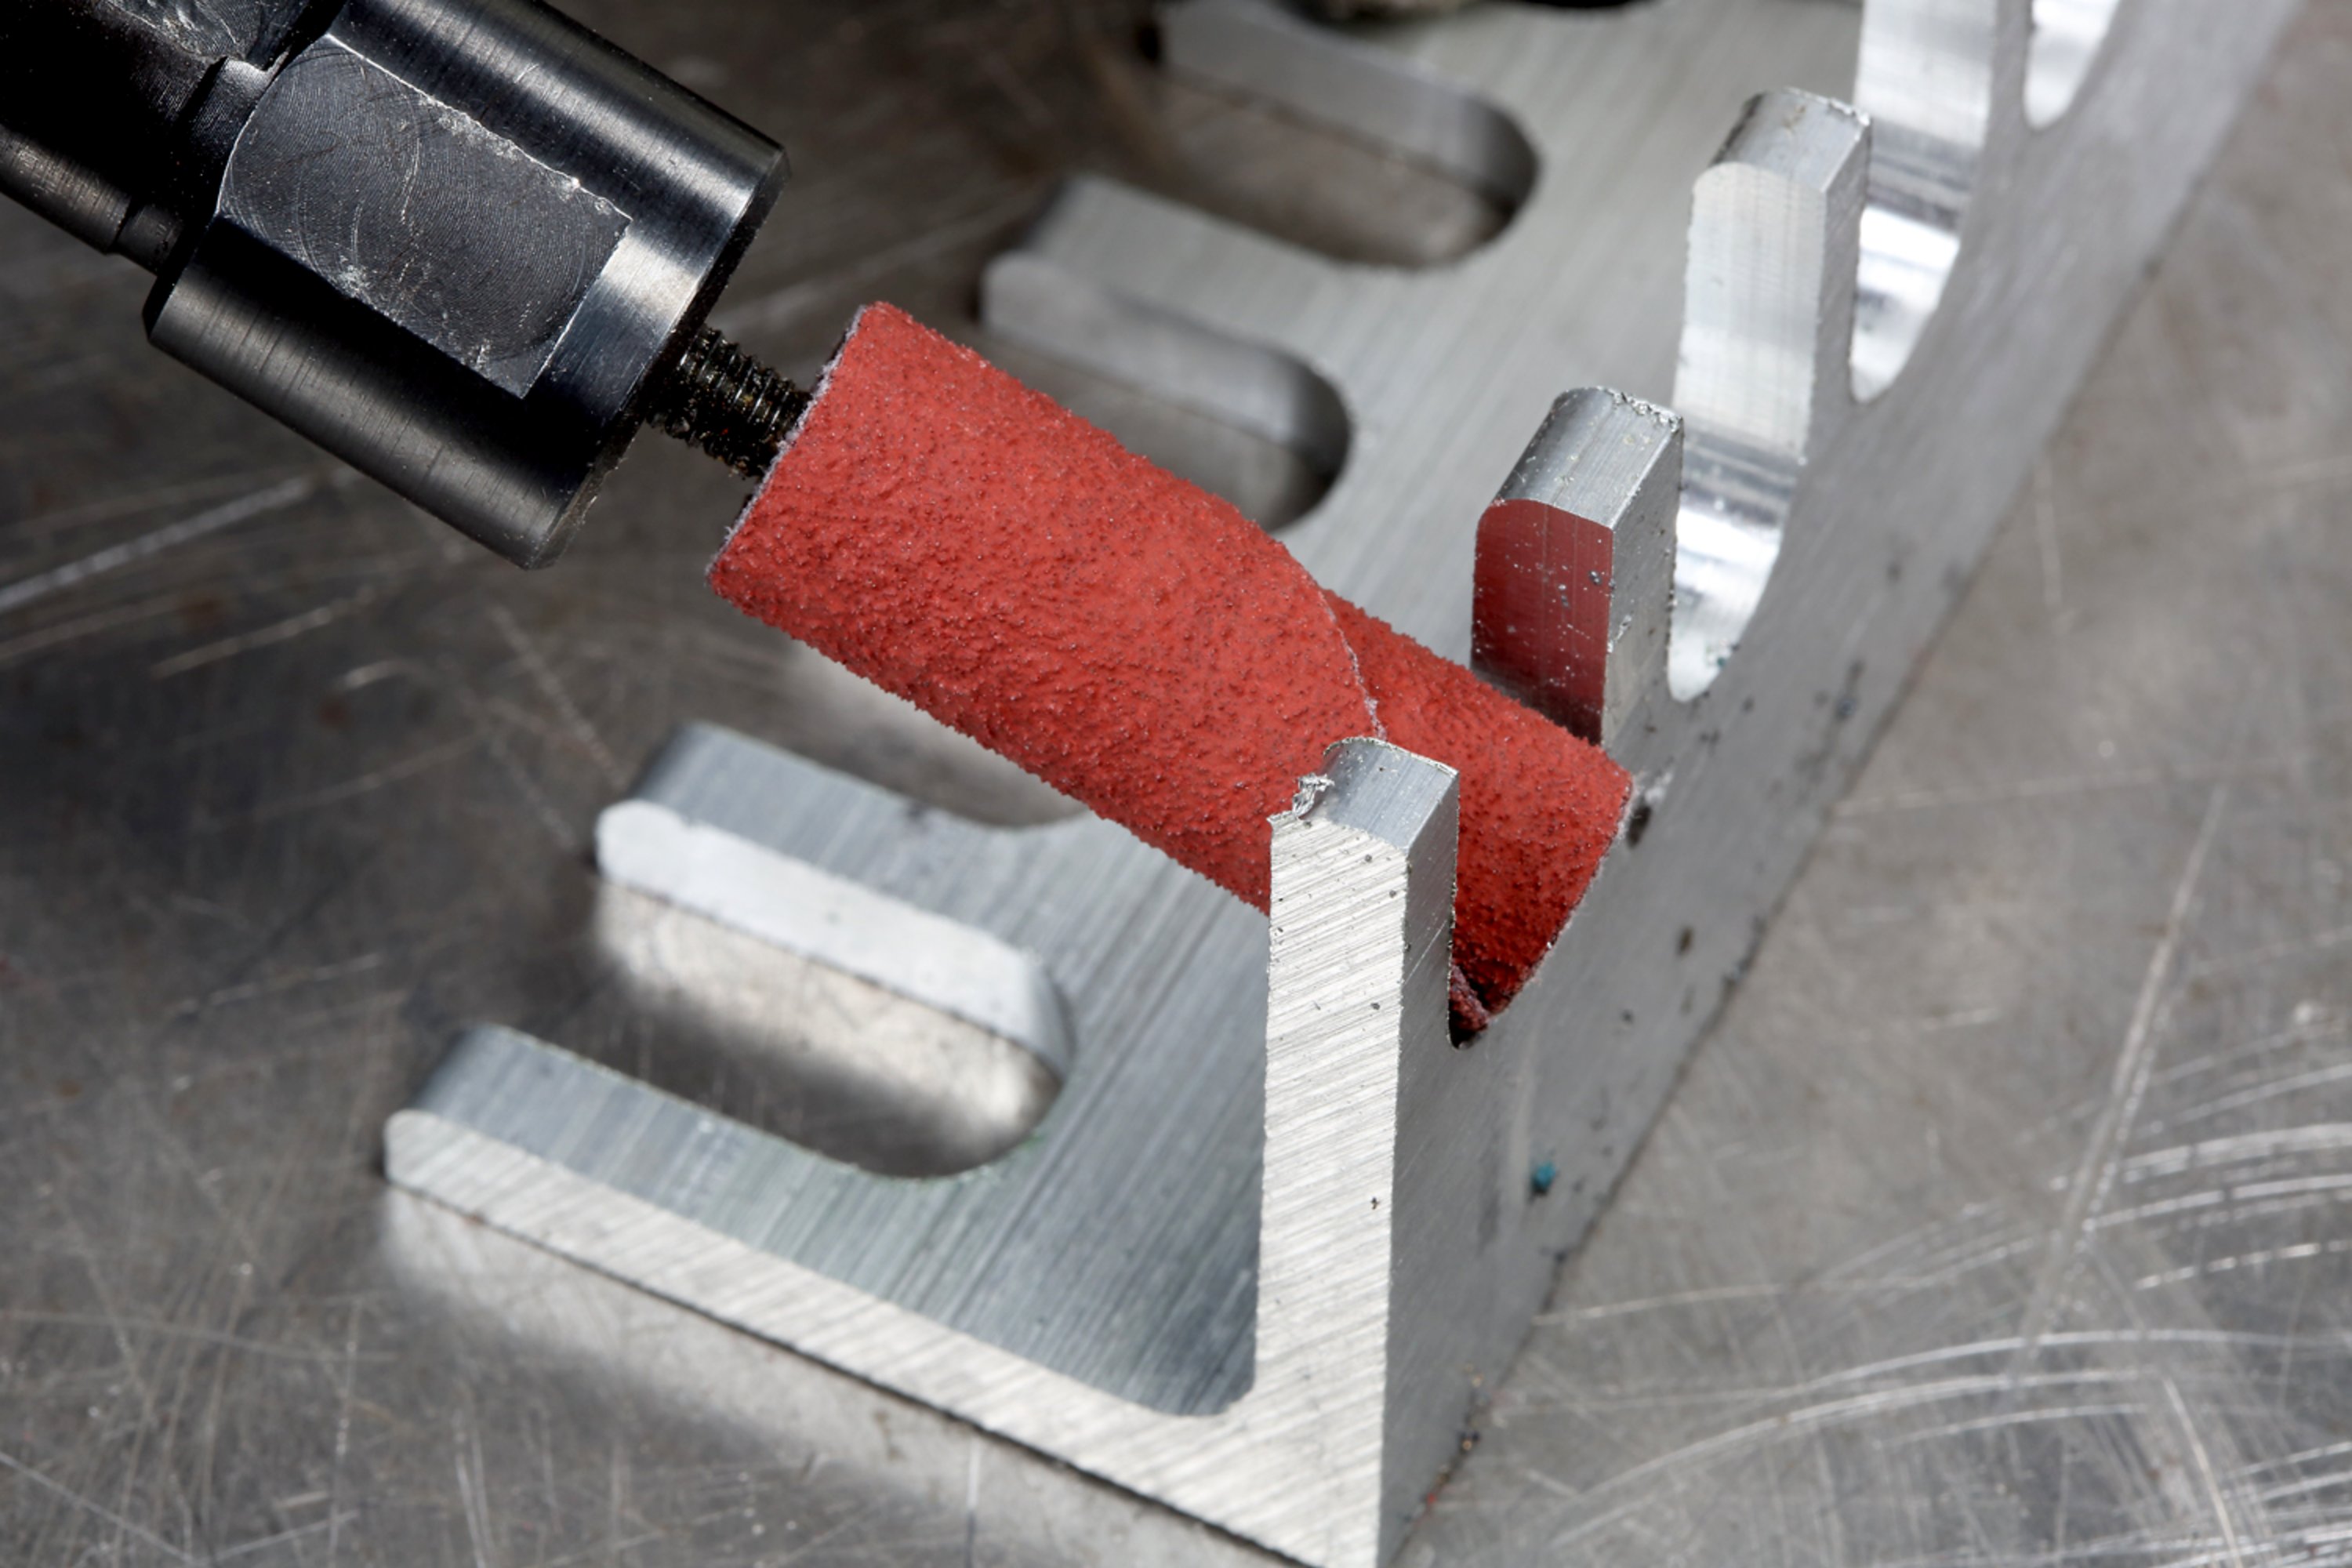 The Standard Abrasives™ Aluminum Oxide Cartridge Roll small size and shape enable it to blend, deburr and polish inside holes and diameters or on irregular surfaces and contours.